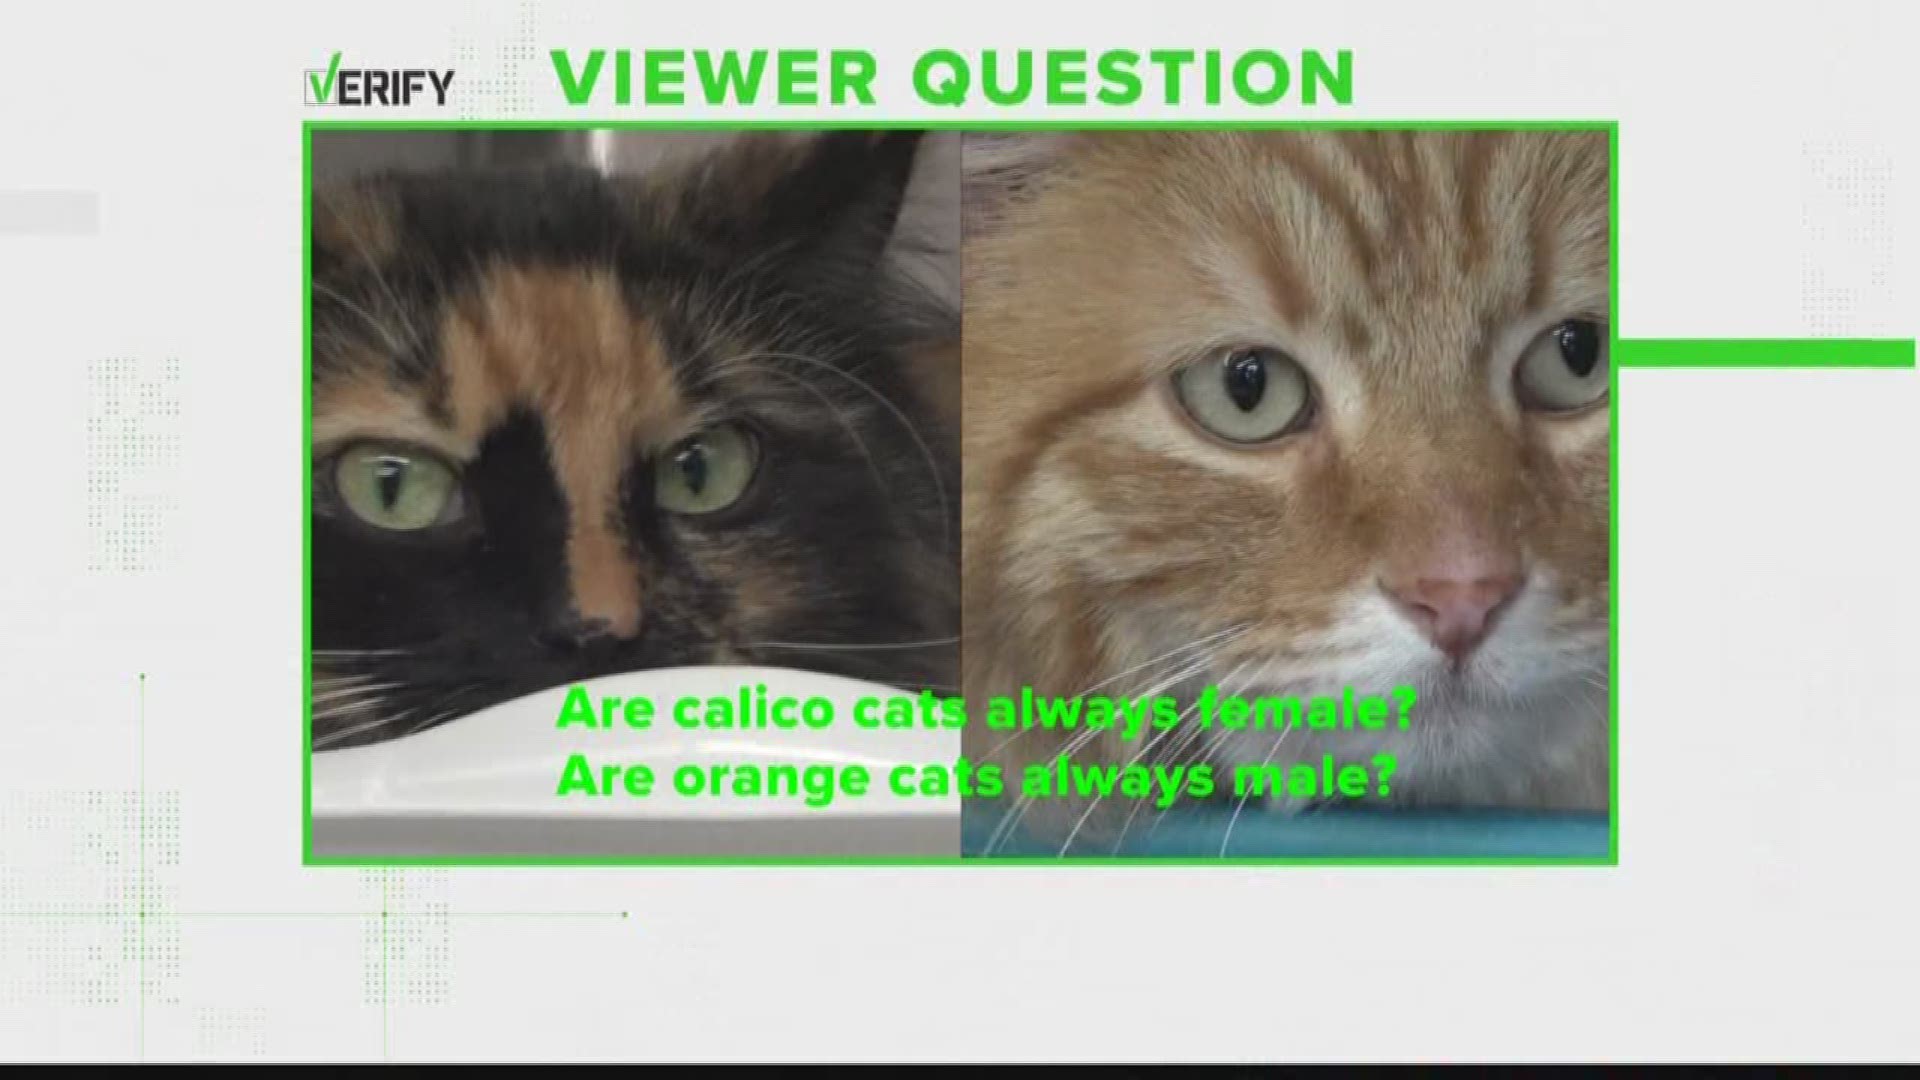 The executive director of SpokAnimal said calico cats that come in to the shelter are always female and the orange cats always male. KREM set out to verify if this is always the case.